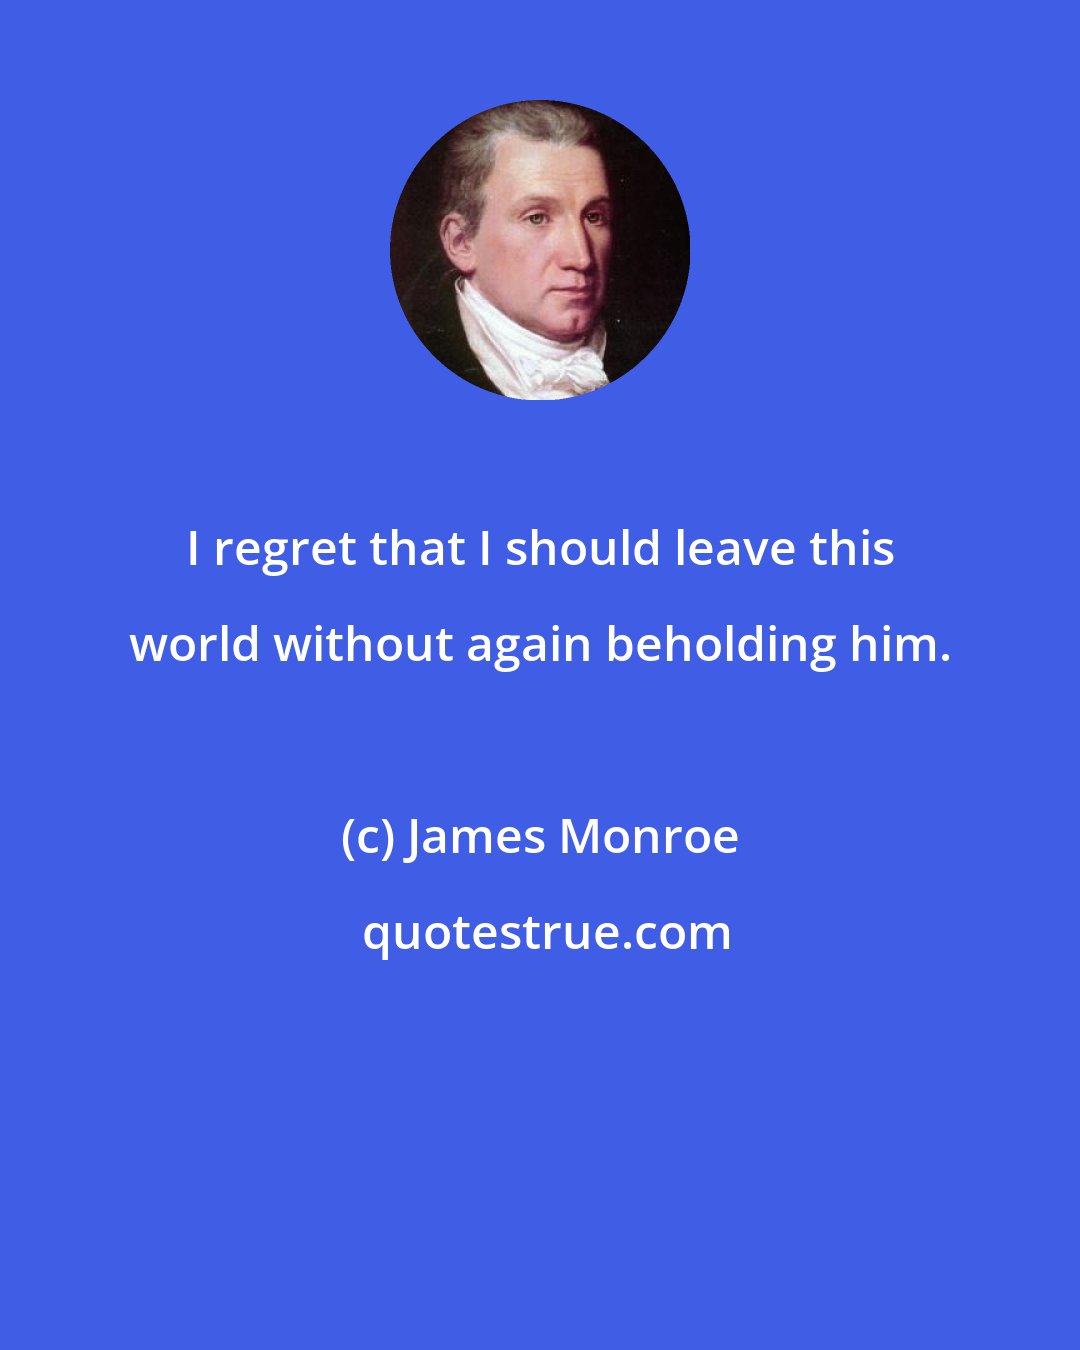 James Monroe: I regret that I should leave this world without again beholding him.